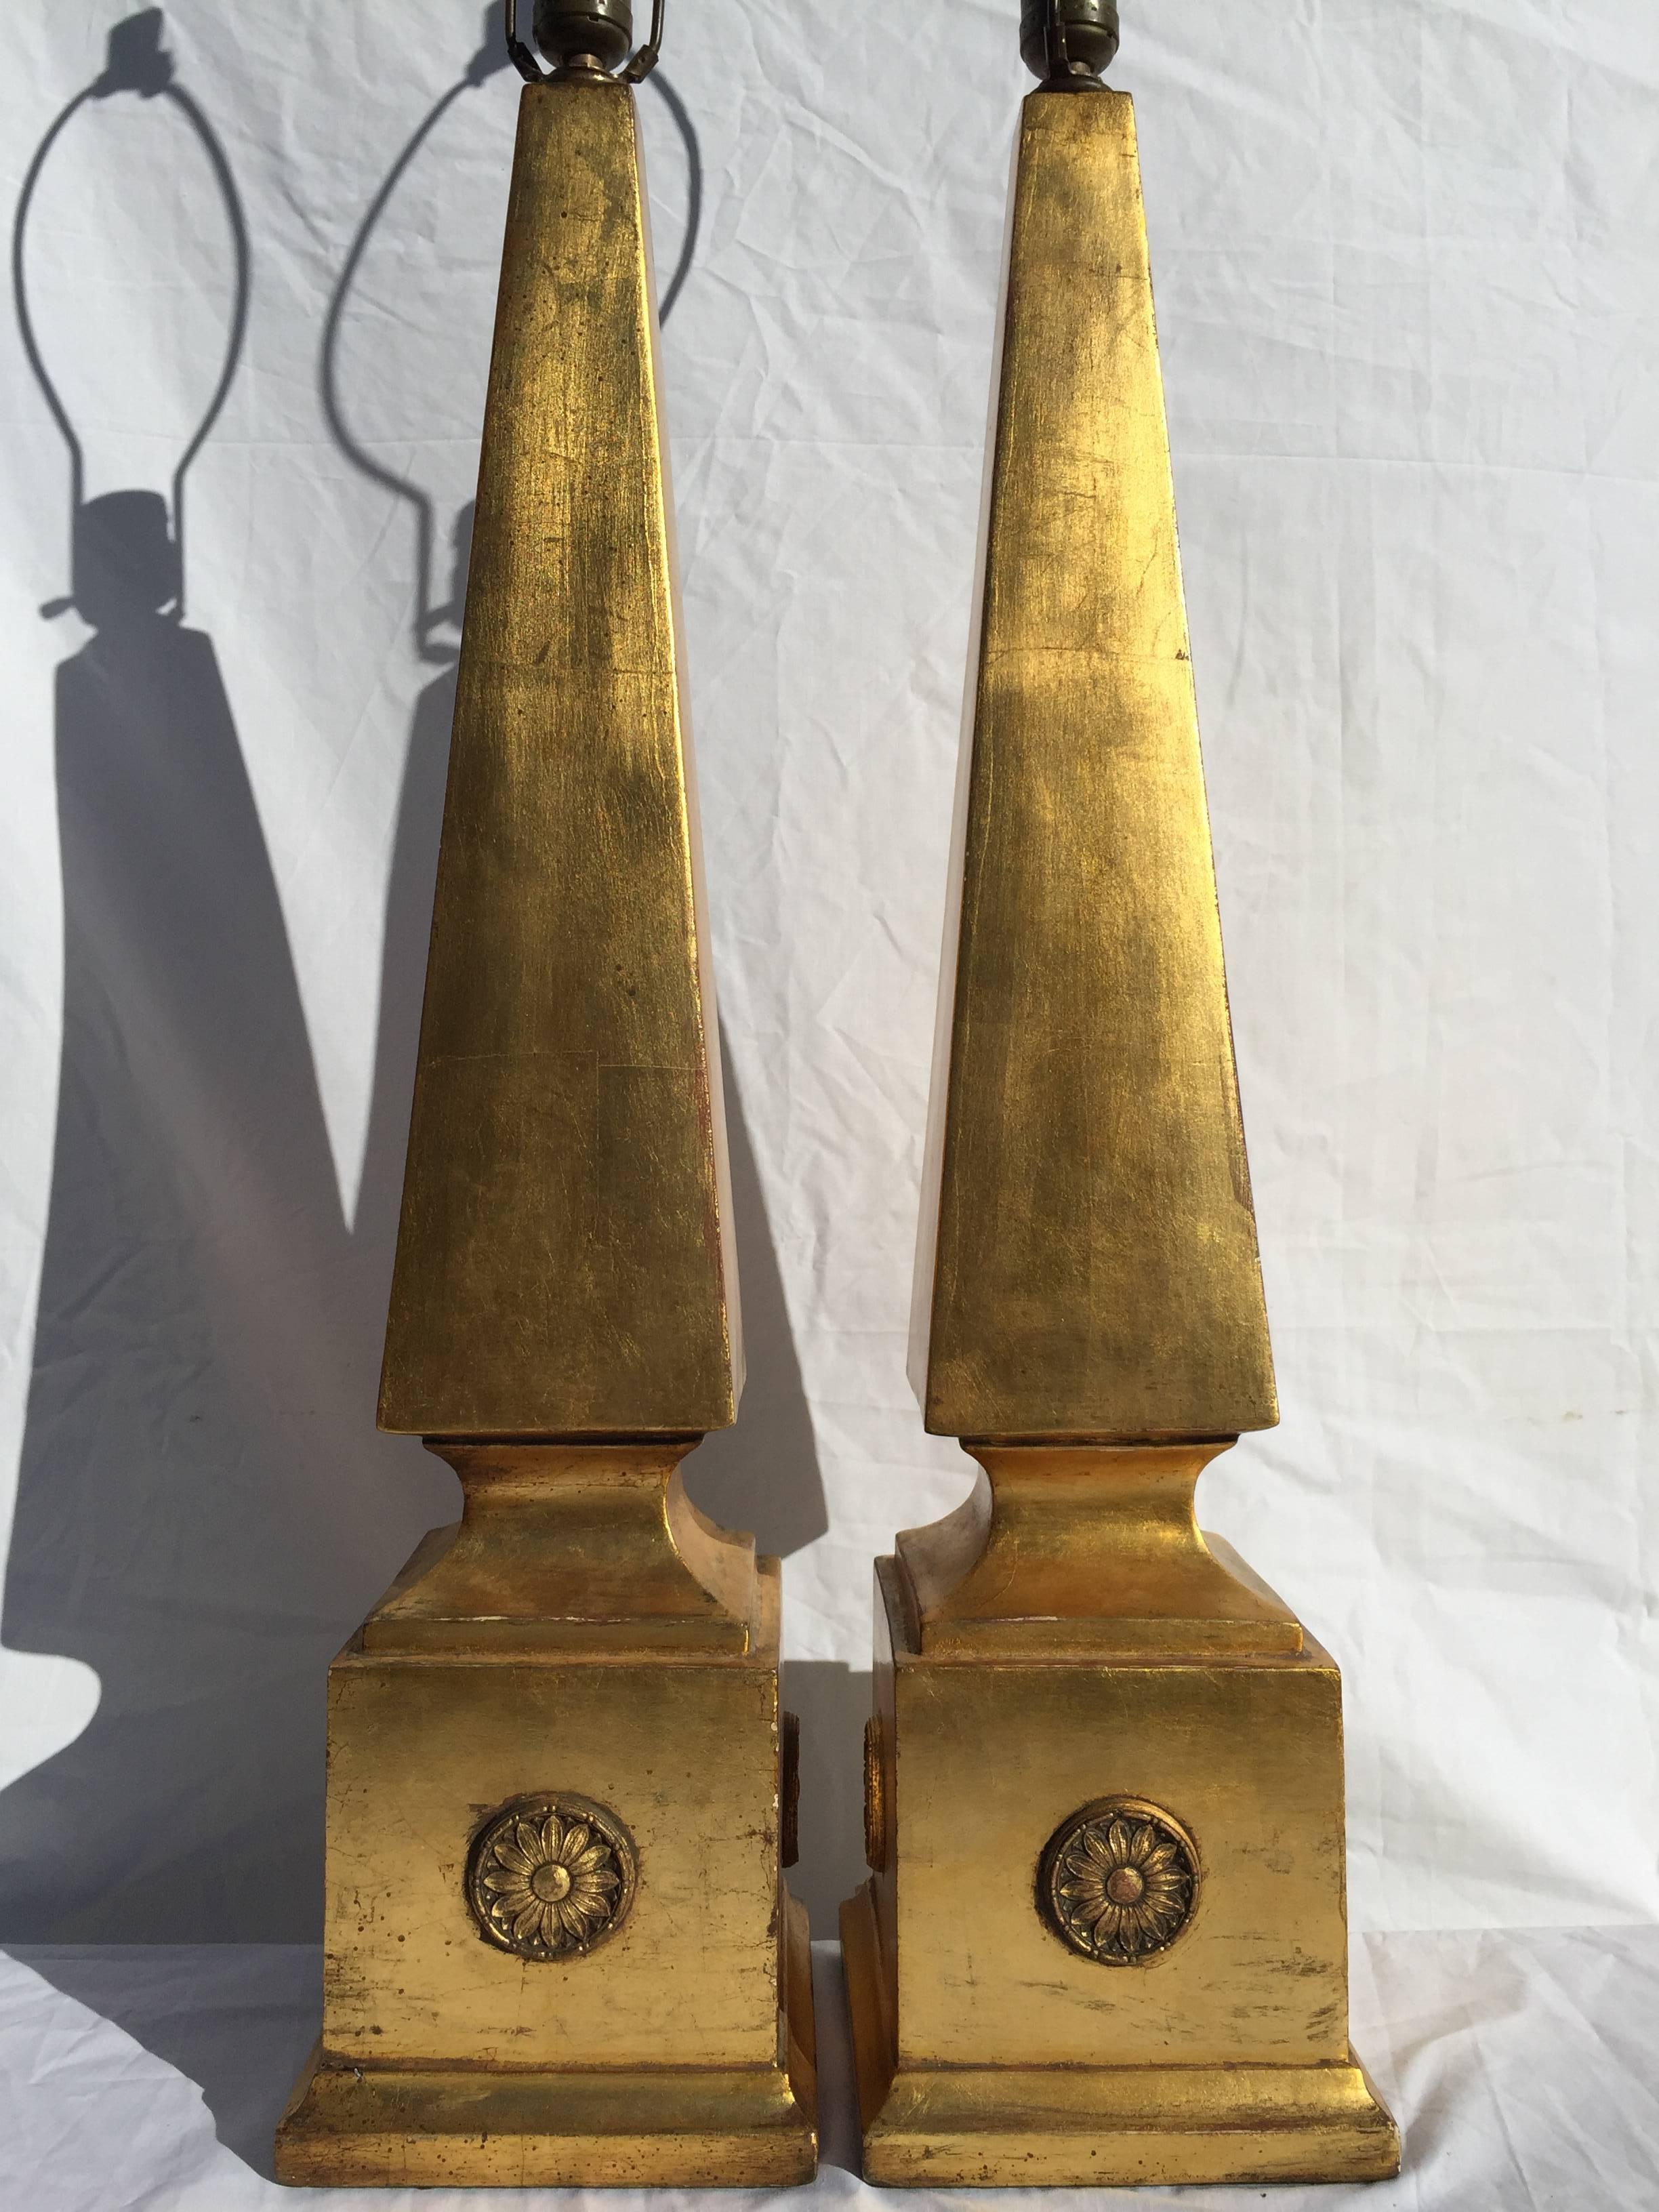 Let there be light and sunflowers and a Classic form. This pair of lamps has a scale quite grand, a commanding presence and a gilt finish over what I believe to be plaster. The bases are square and decorated with sunflower medallions on each of the